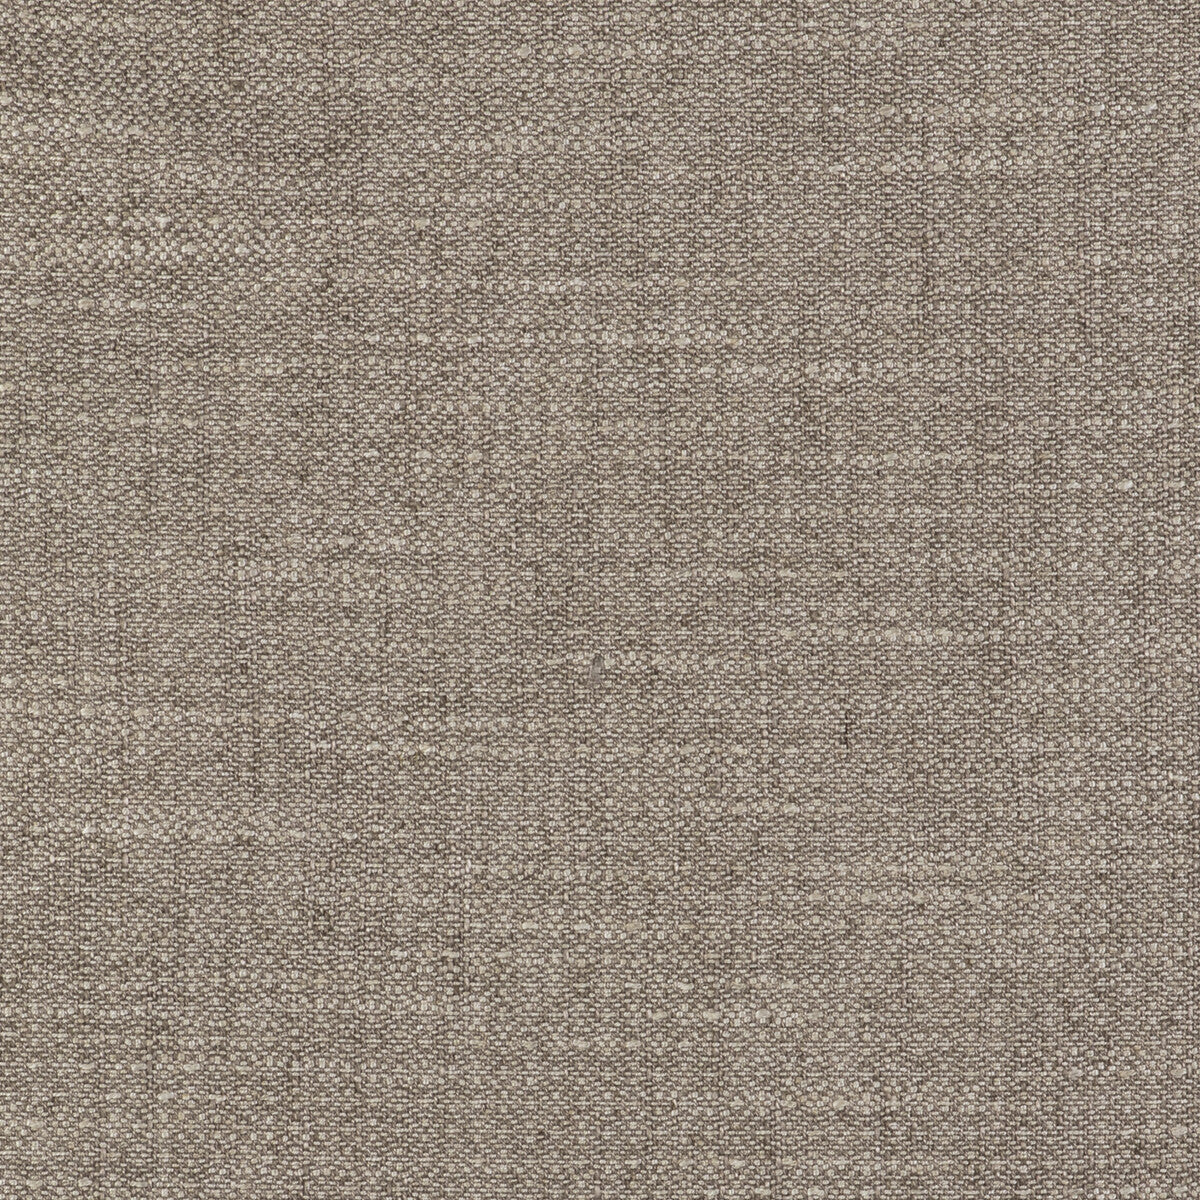 Kf Gyd fabric - pattern GDT5517.001.0 - by Gaston y Daniela in the Gaston Libreria collection